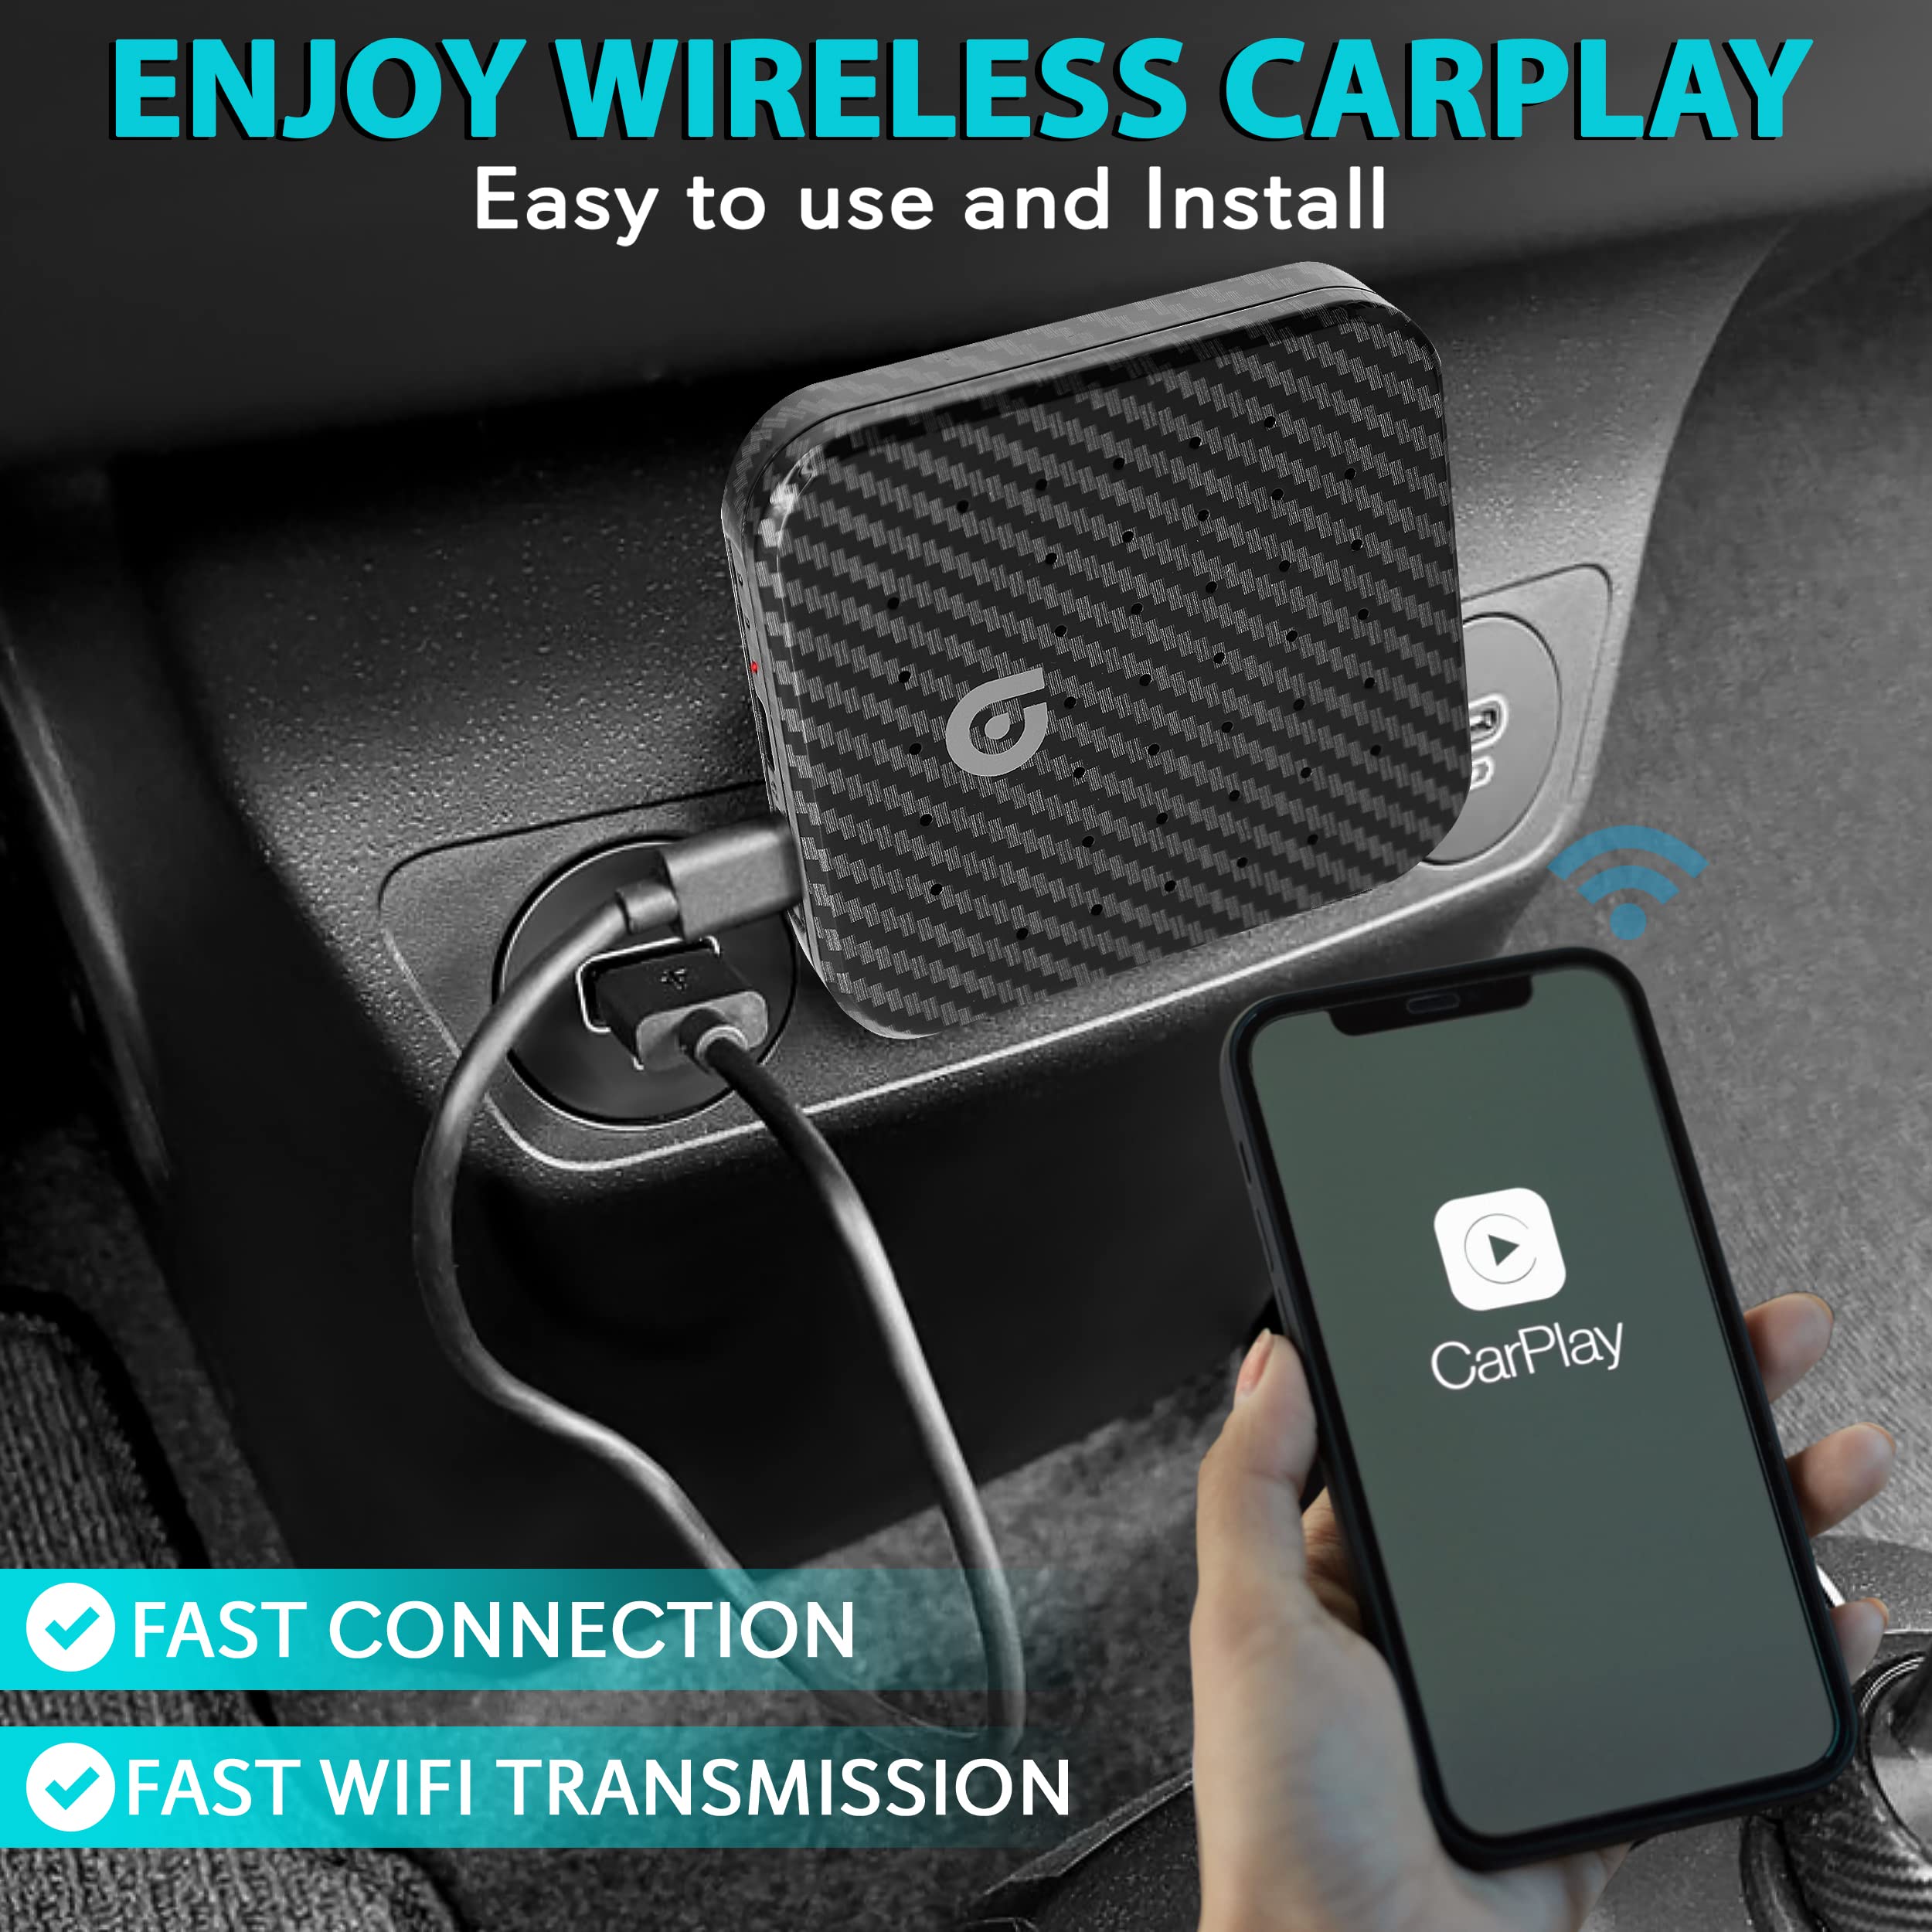 Pyle Wireless Carplay iA Box, 4GB RAM 64GB ROM, 2.4GHz, 5GHz Dual Band WiFi BT Octa Core 64Bits D, 4K Full HD, H.265, USB3.0 Android Box, Screen Mirroring, Install Android Apps - PAS20BD